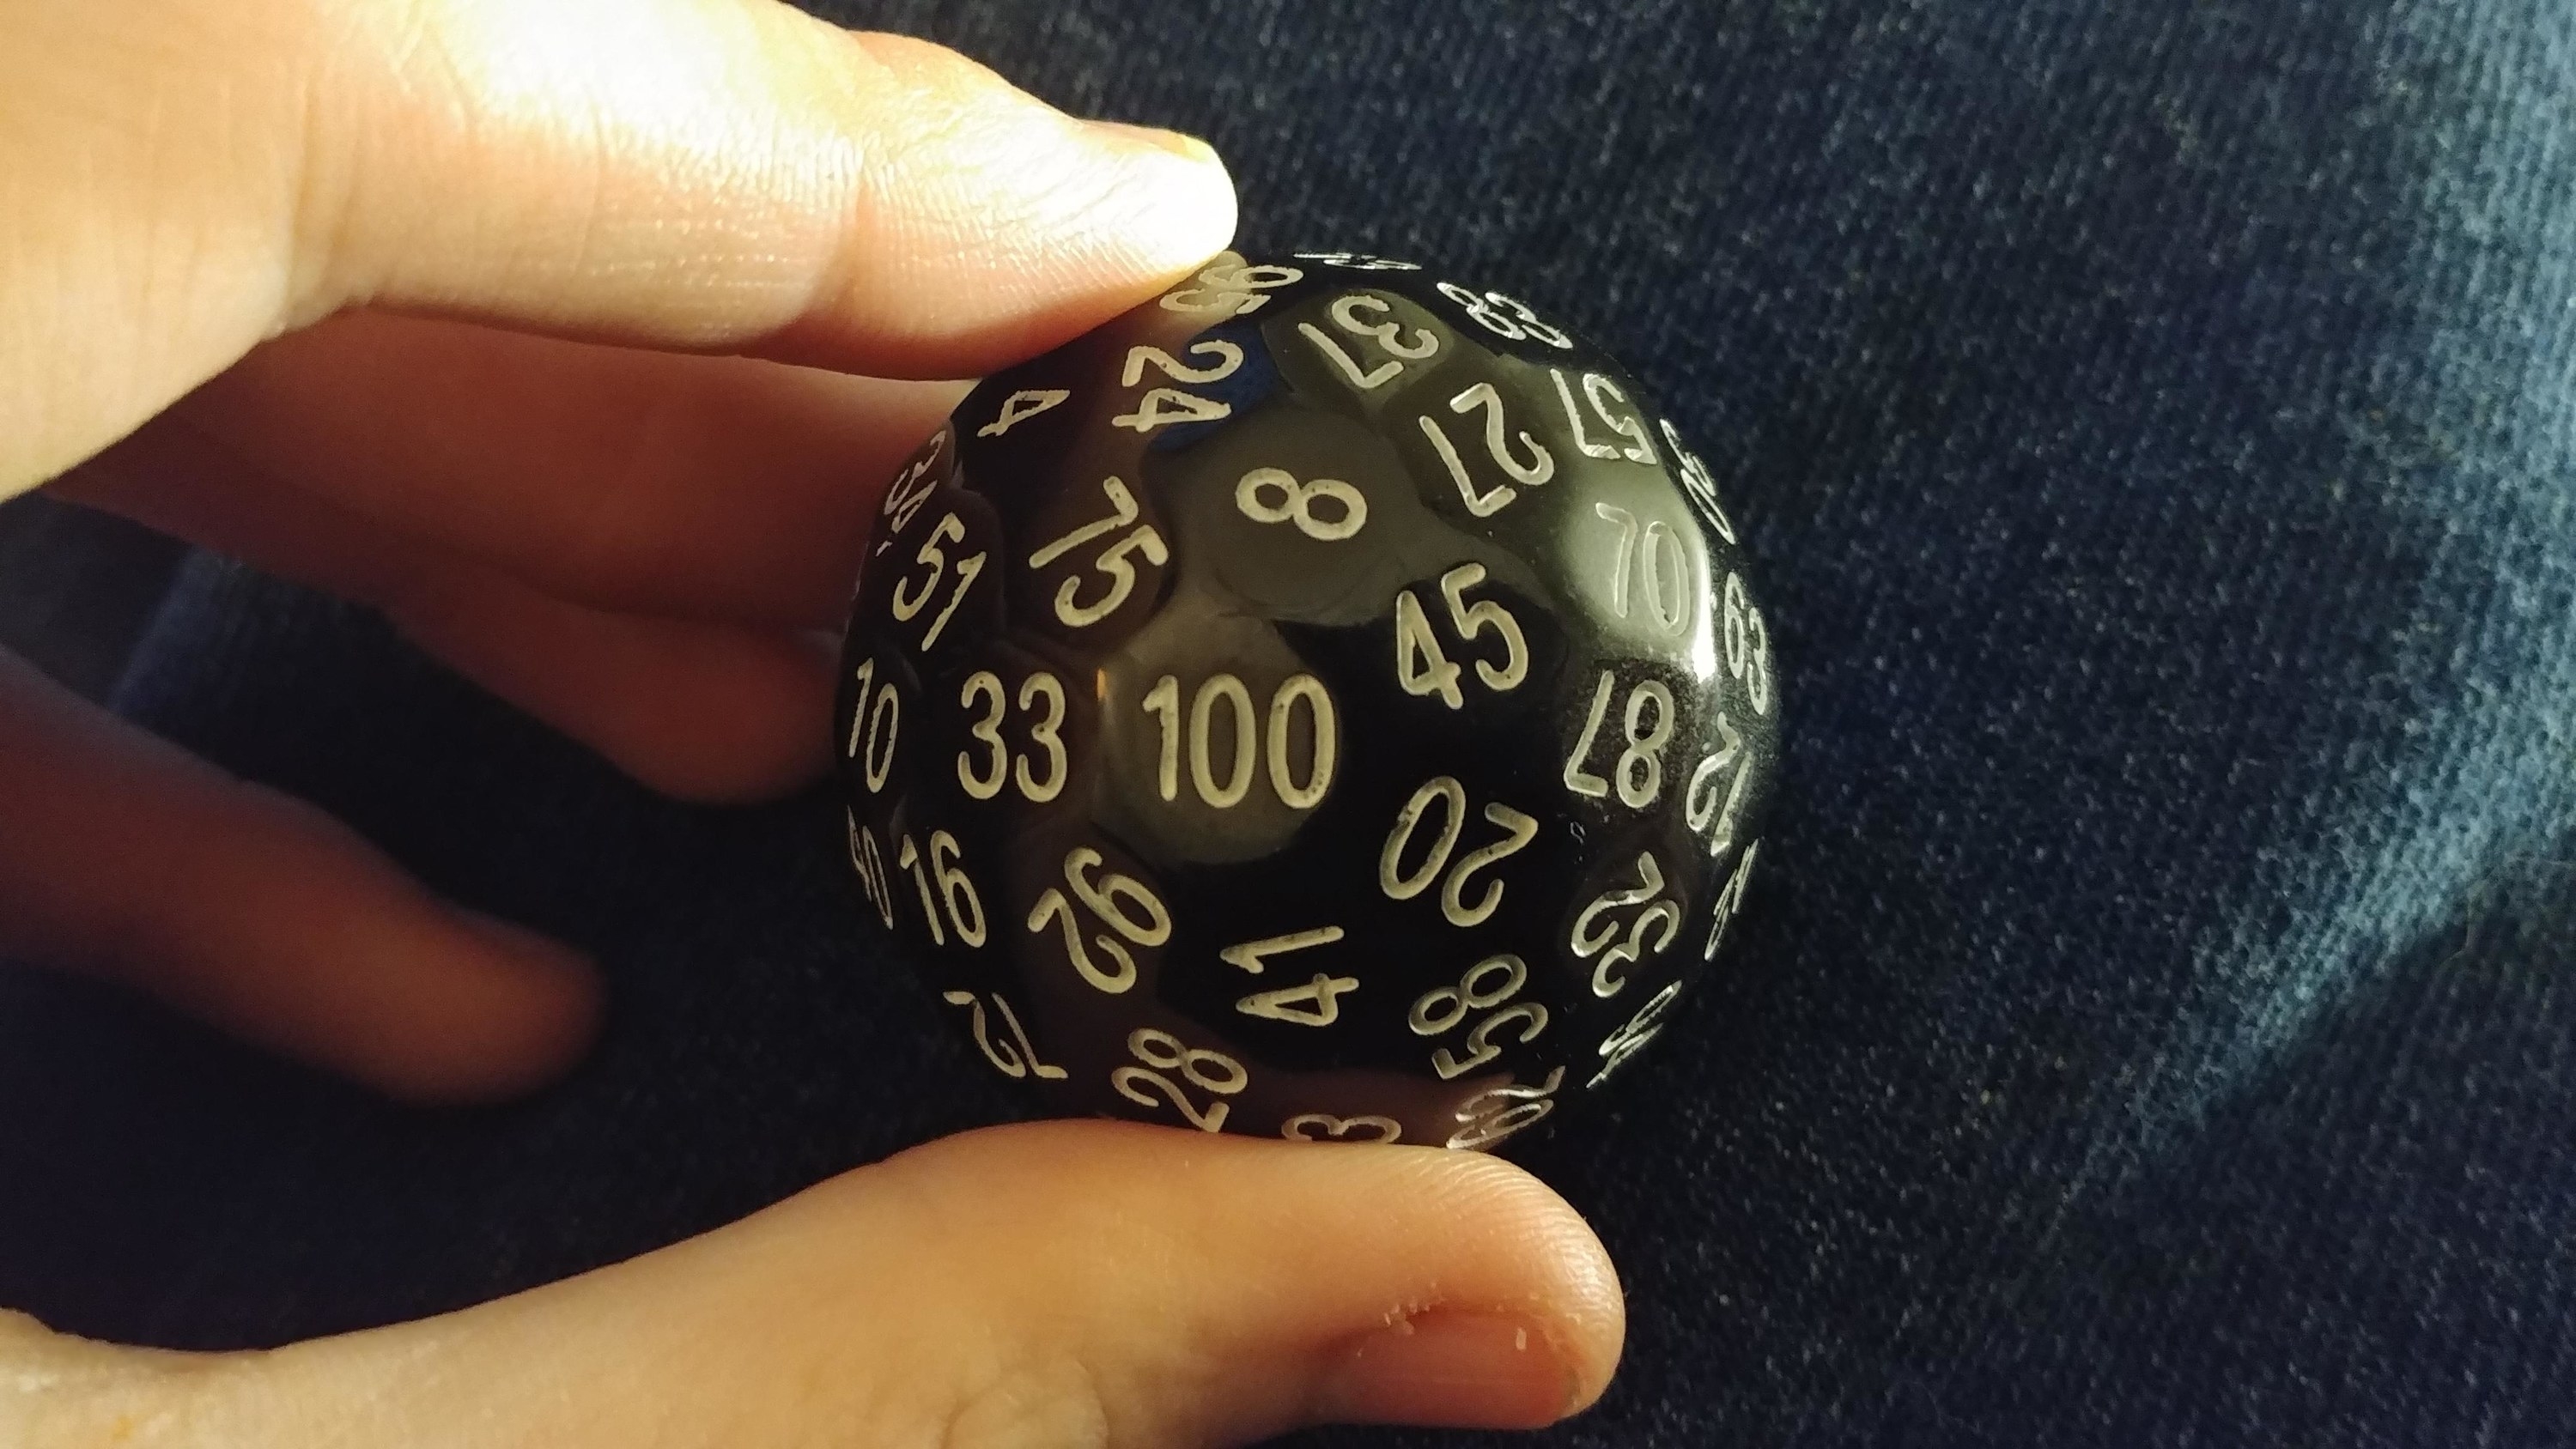 A circular die with many numbers on it held between a thumb and forefinger